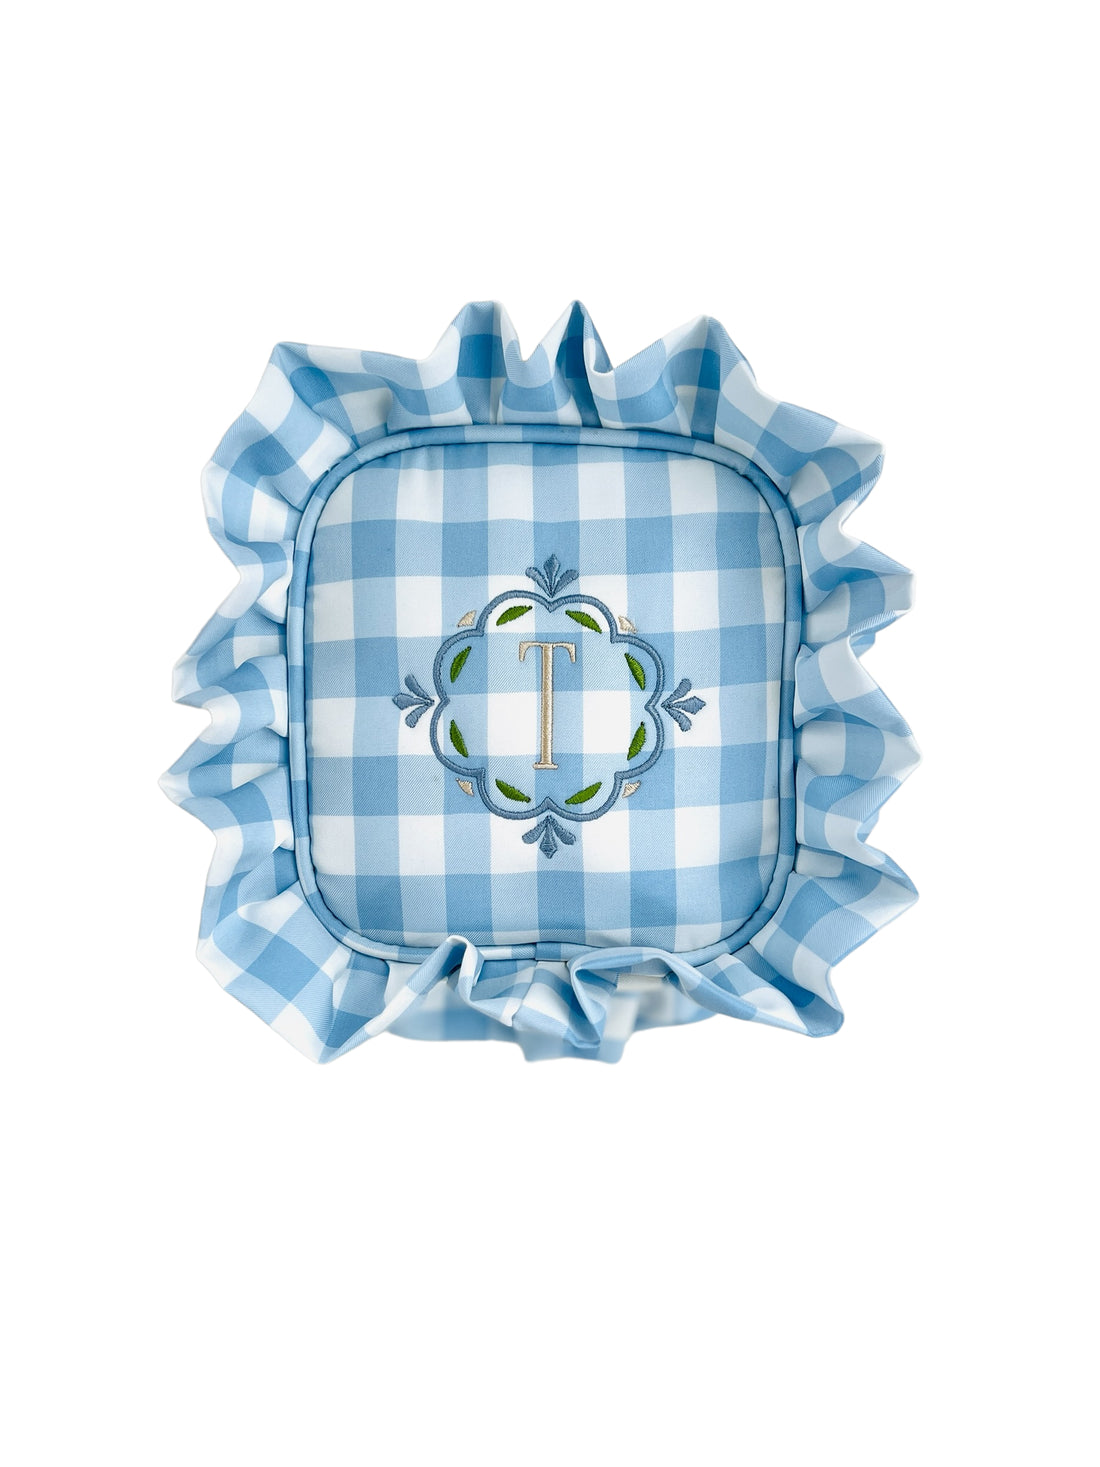 Gingham nylon accessory bag, monogram available in